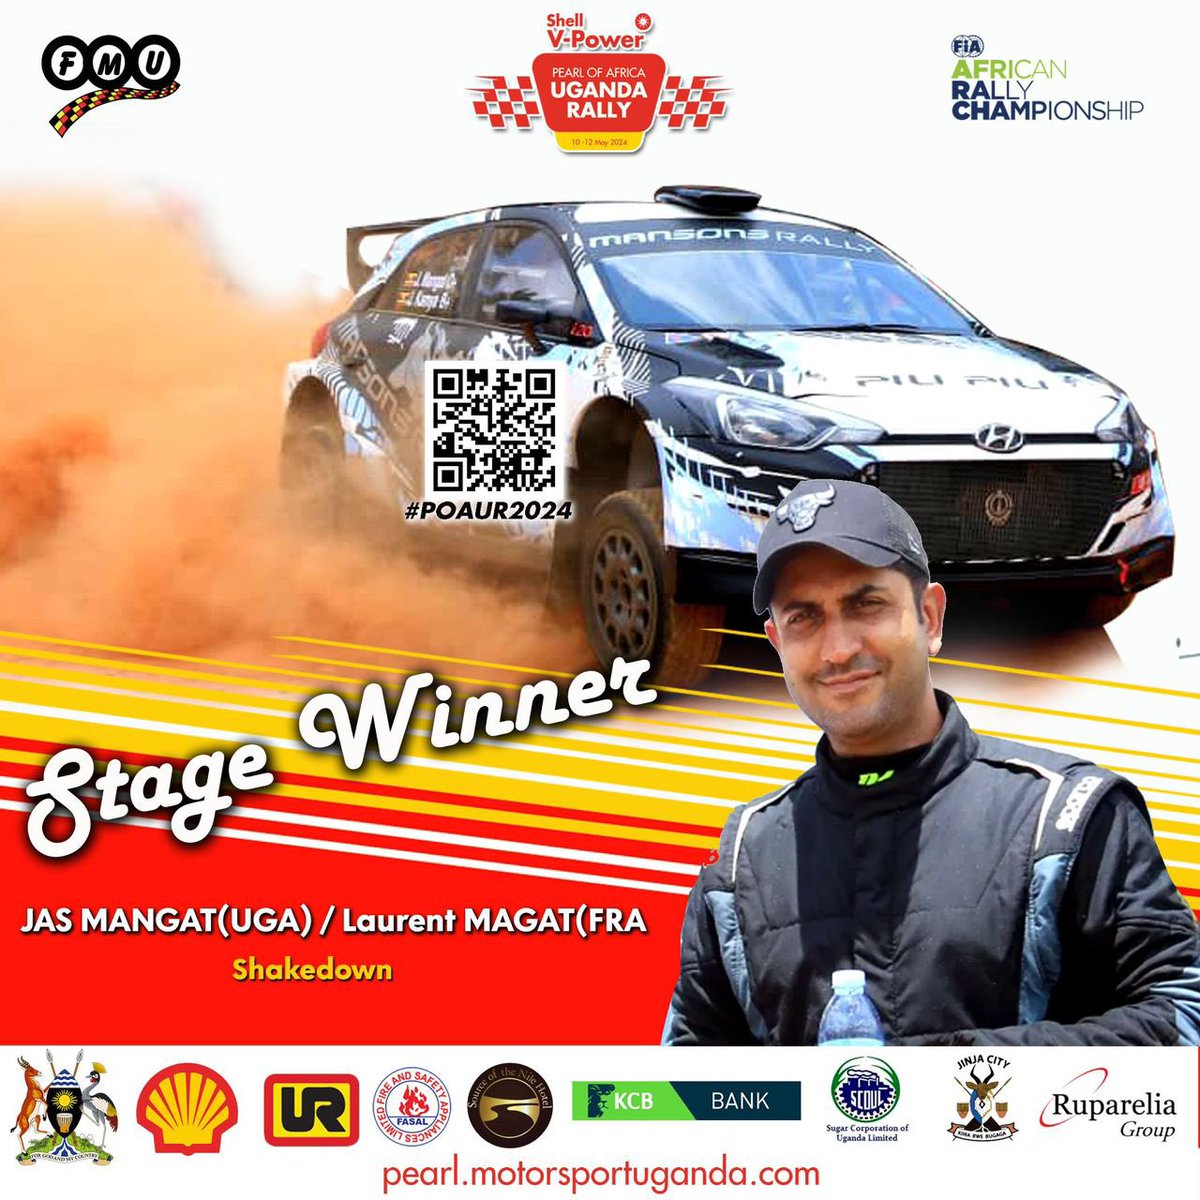 The #UNBEATABLE Performance that #ShellVPower gives your engine is that good experirnce and secret Jas Mangat uses to win car races Recall that Jas Mangat is a three-time National Rally Champion and the 2022 Pearl of Africa Uganda Rally winner. Top top racer 🏎️ 🔥🔥…